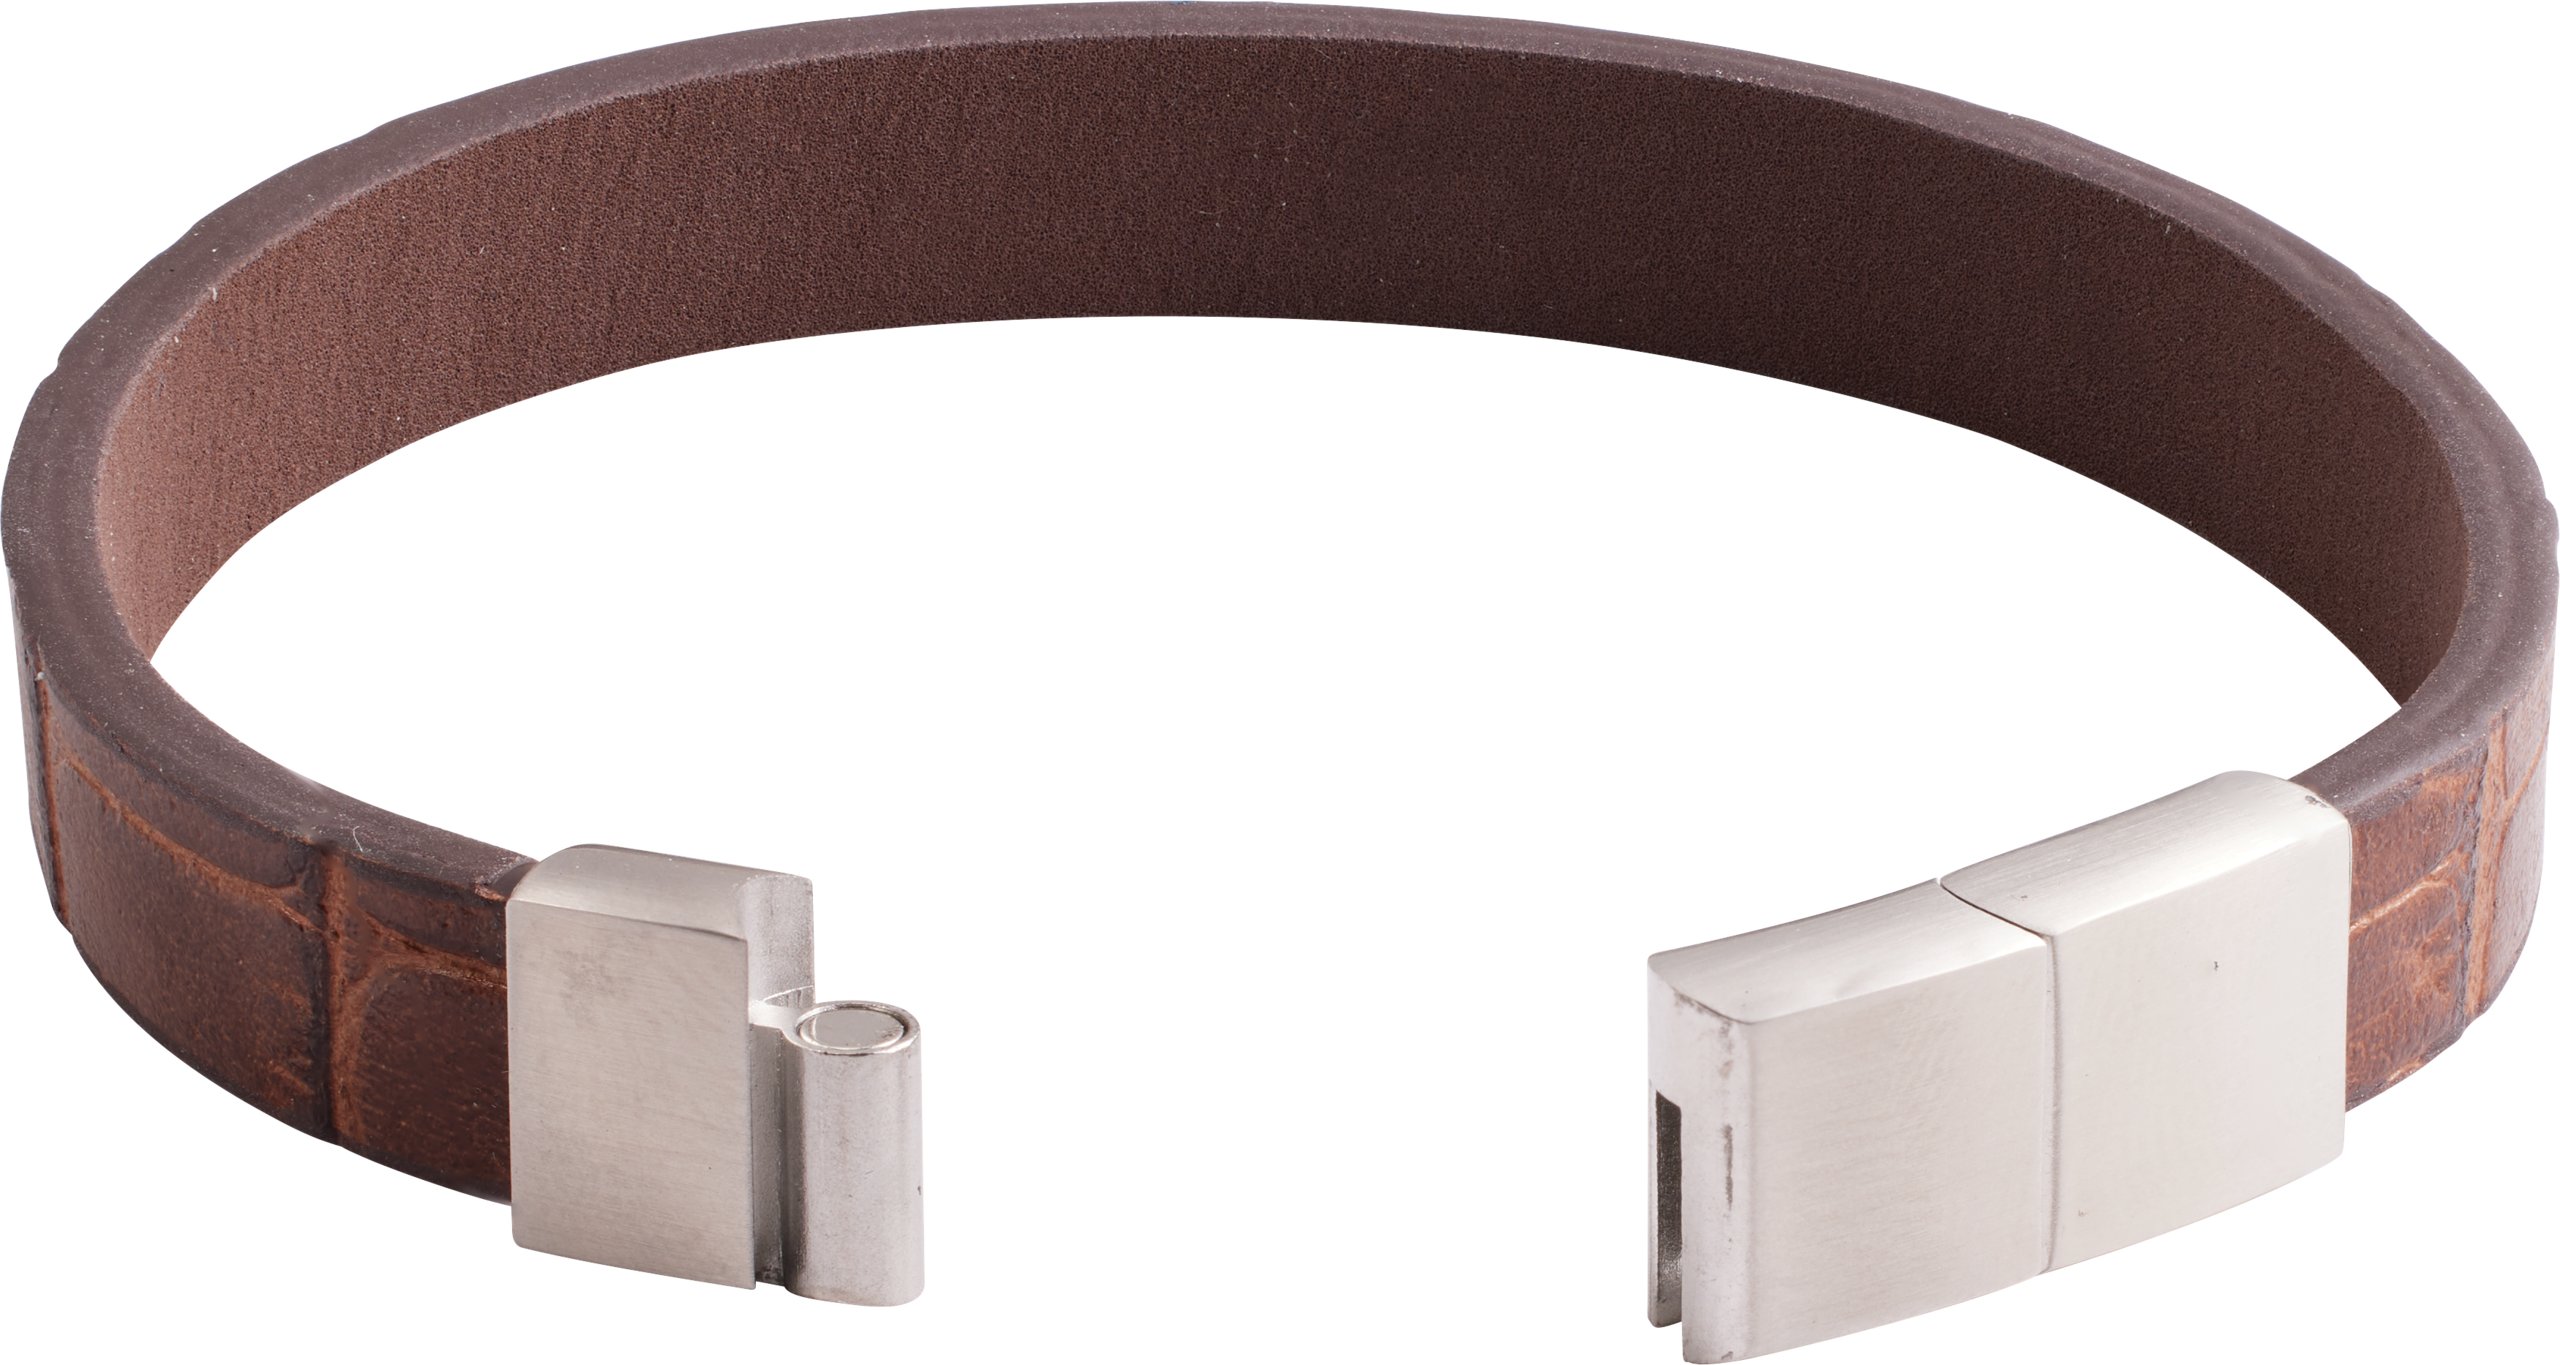 Stainless Steel 11 mm Brown Leather 8 1/2 Bracelet